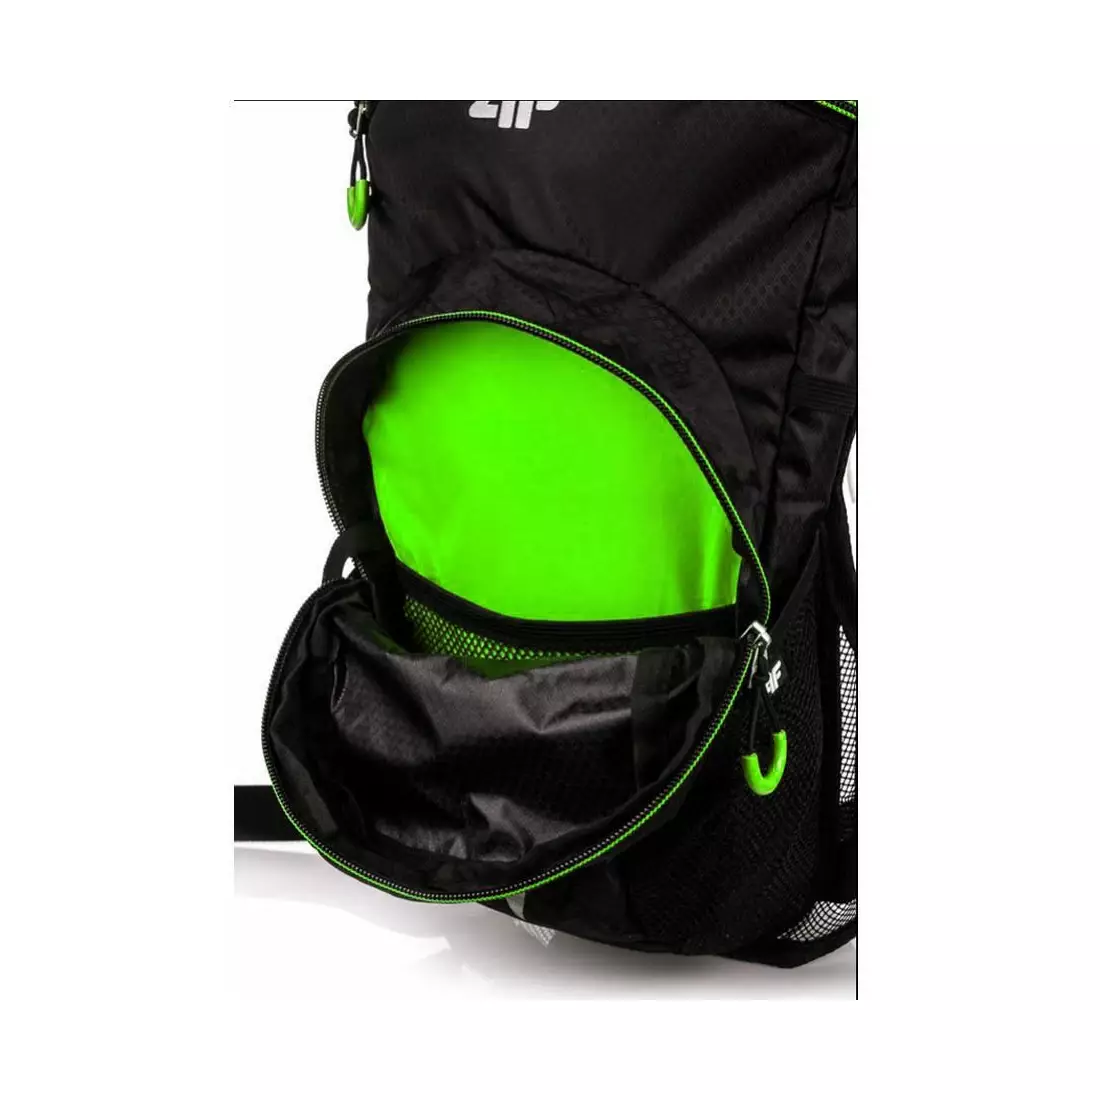 4F PCR002 bicycle backpack black and green